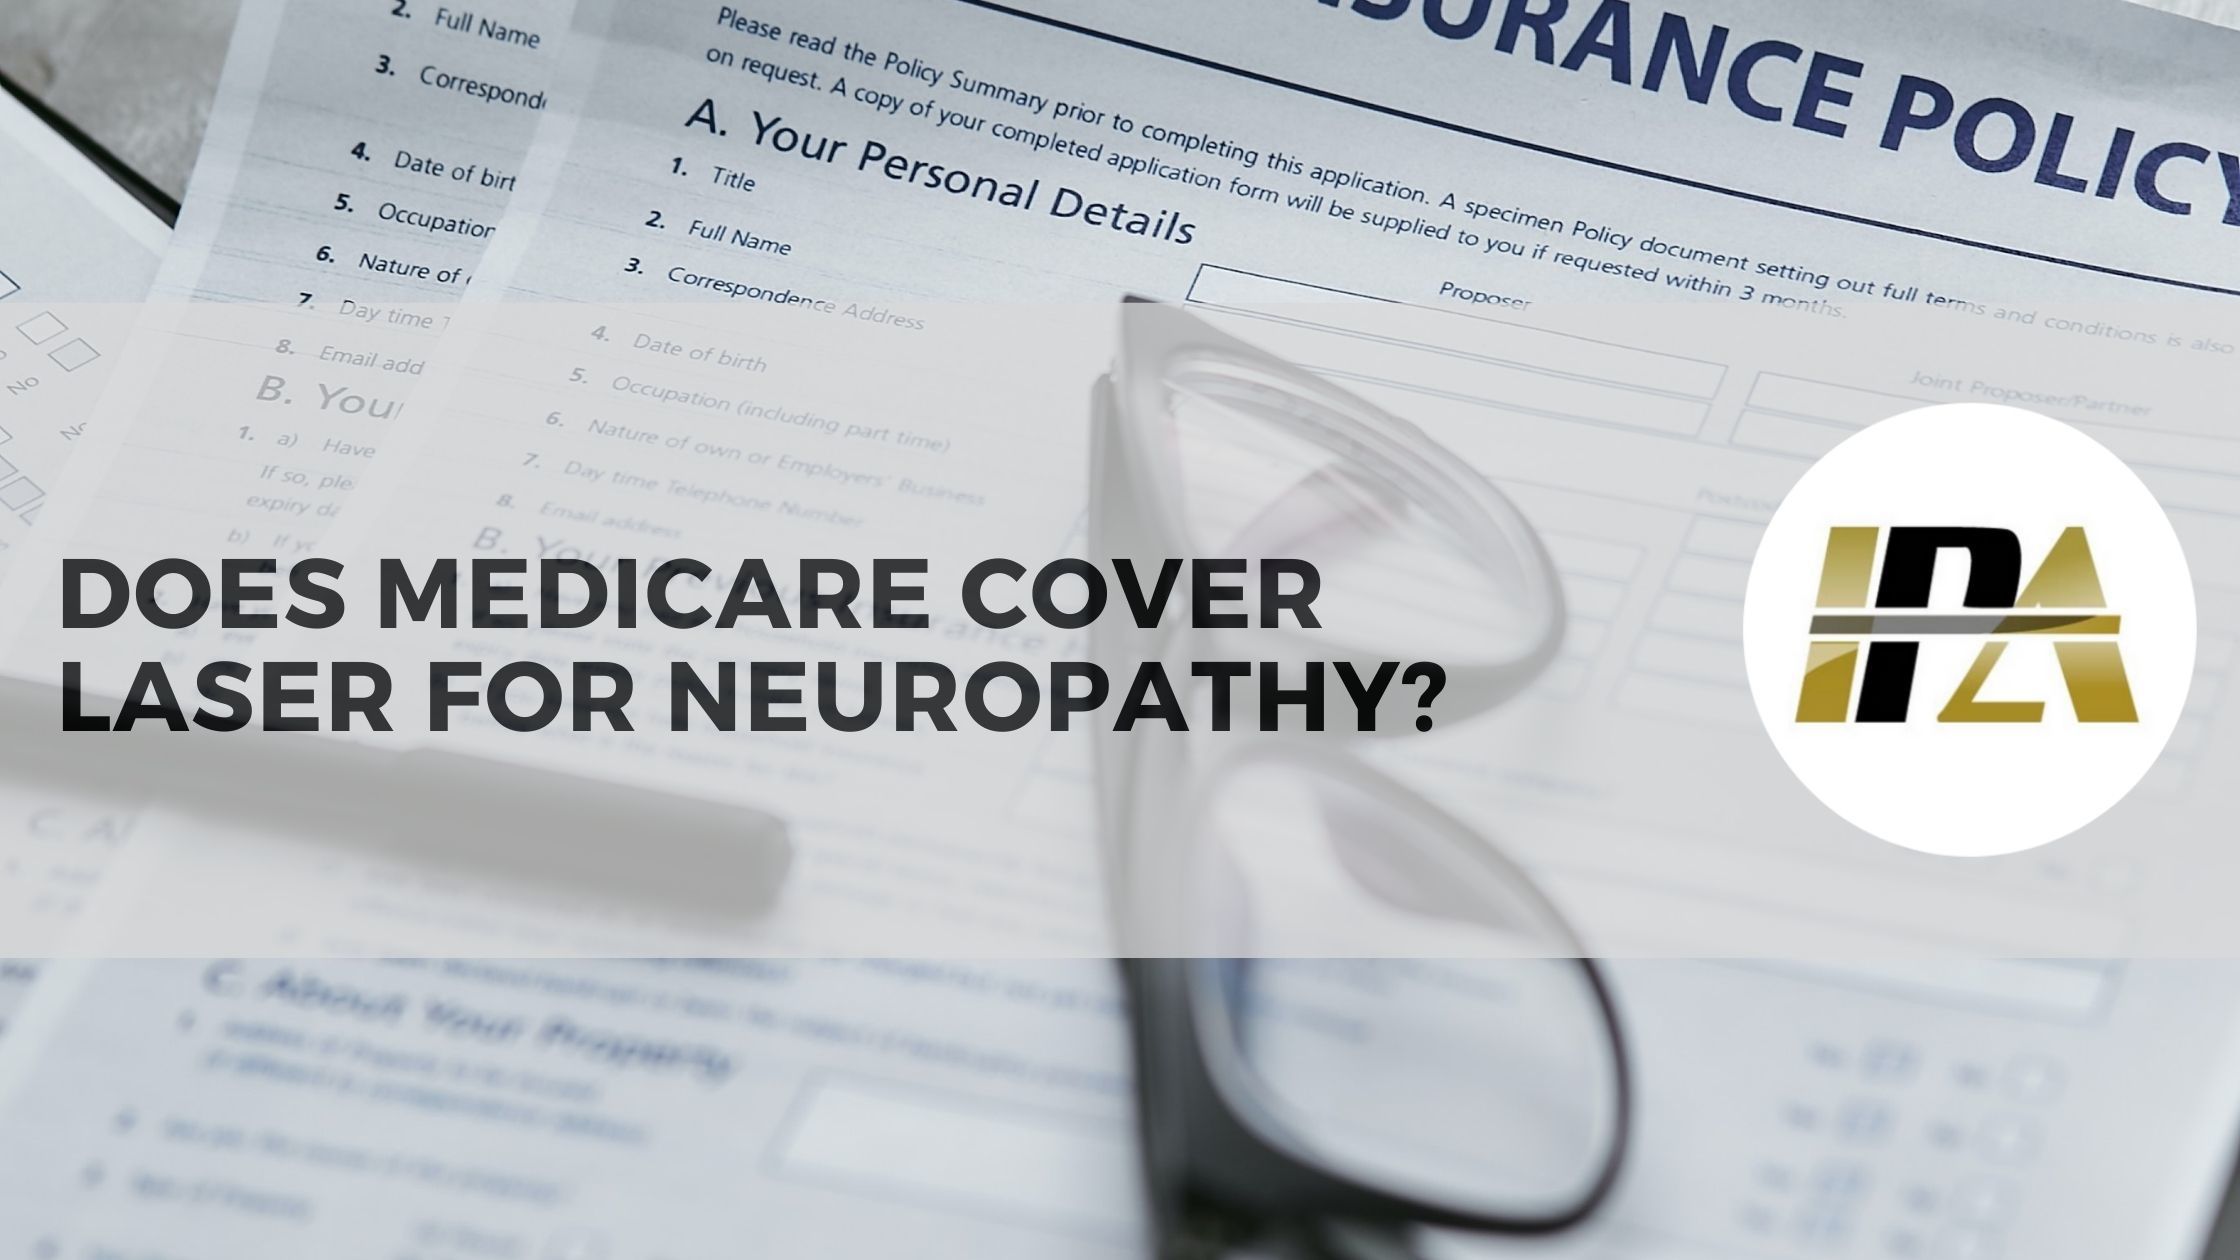 Medicare cover laser for neuropathy